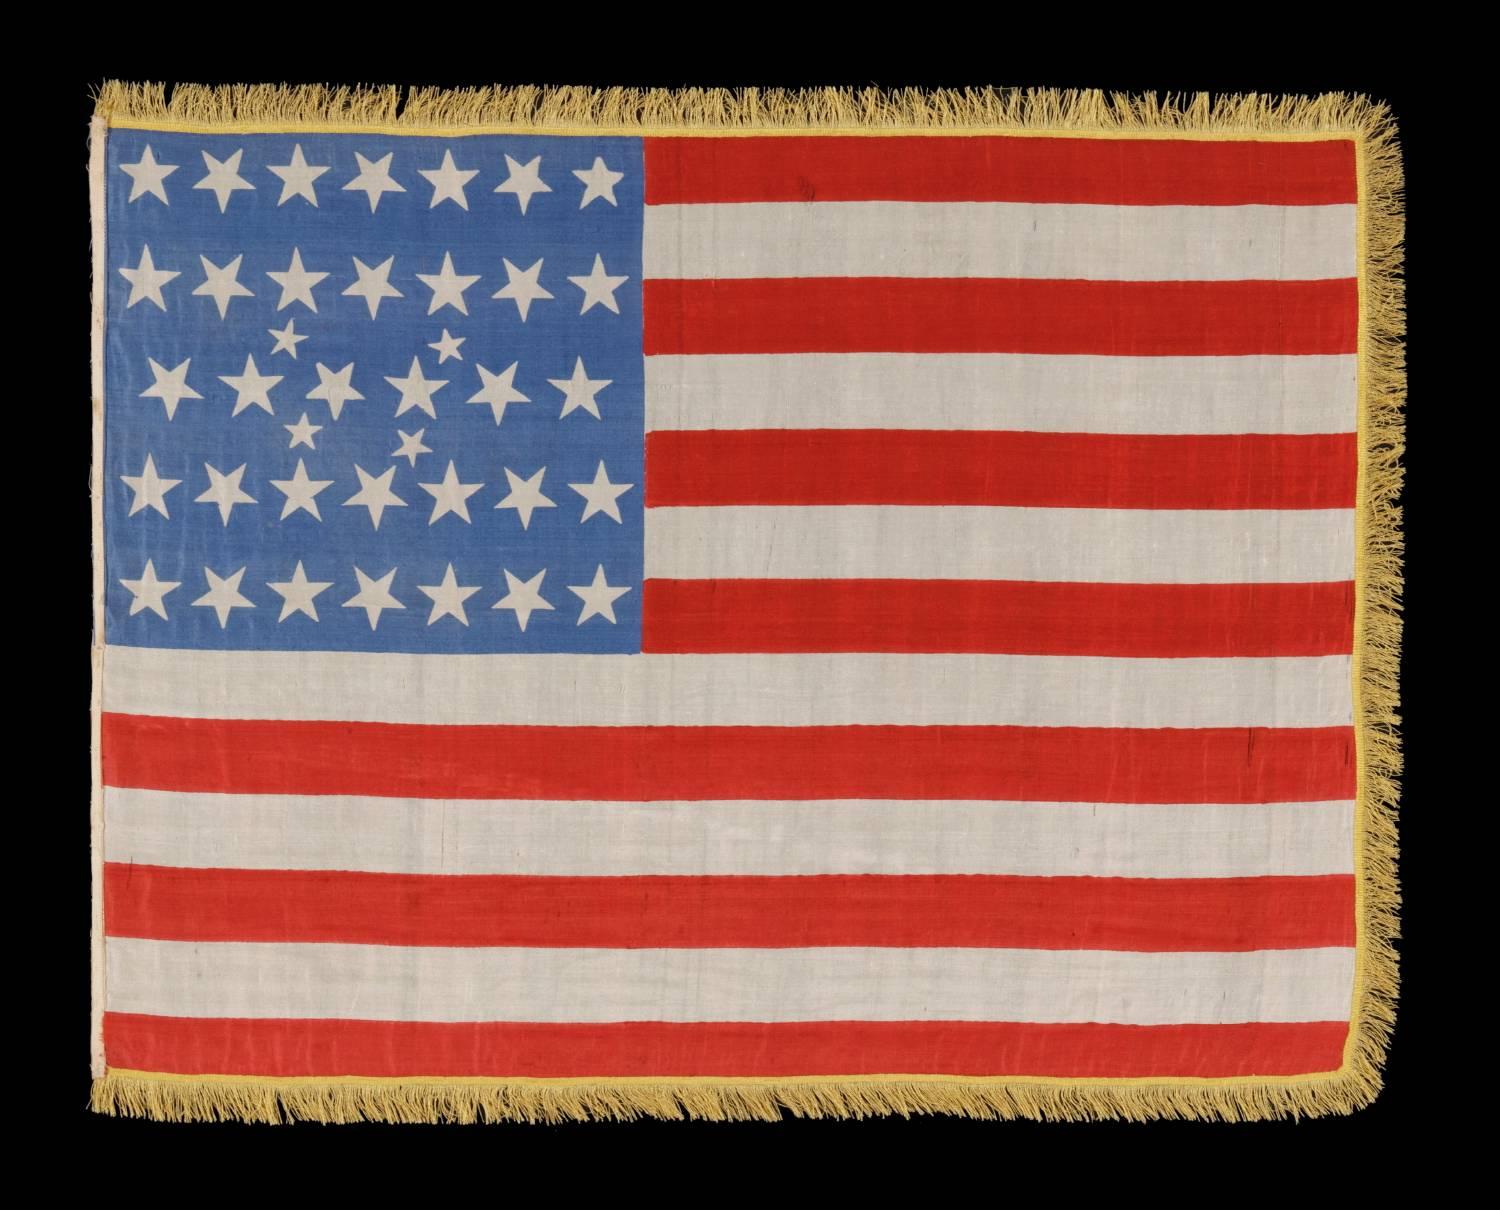 38 stars in an extremely rare lineal configuration that has 4 tiny stars embedded in the pattern, formerly in the collection of richard pierce and pictured in his text on flag collecting:

38 star American national parade flag, printed on silk,